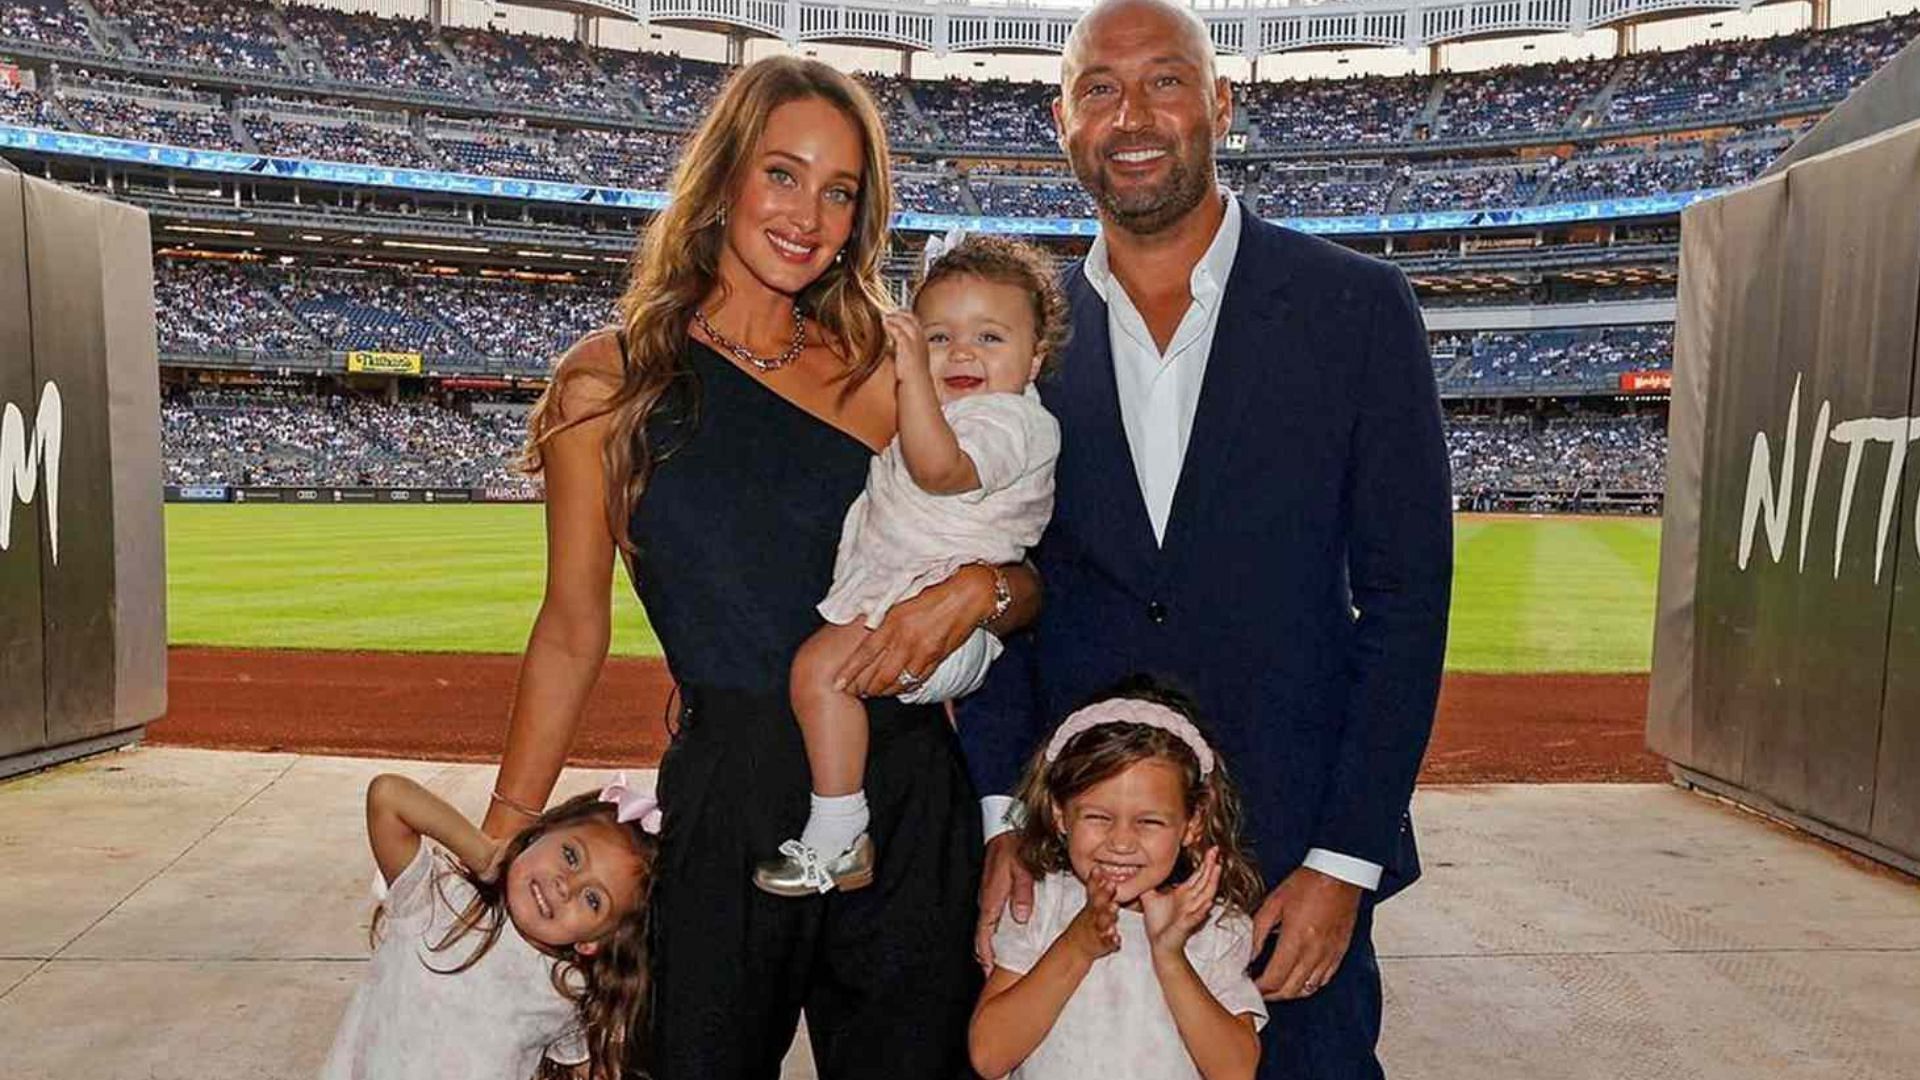 Jeter with his family